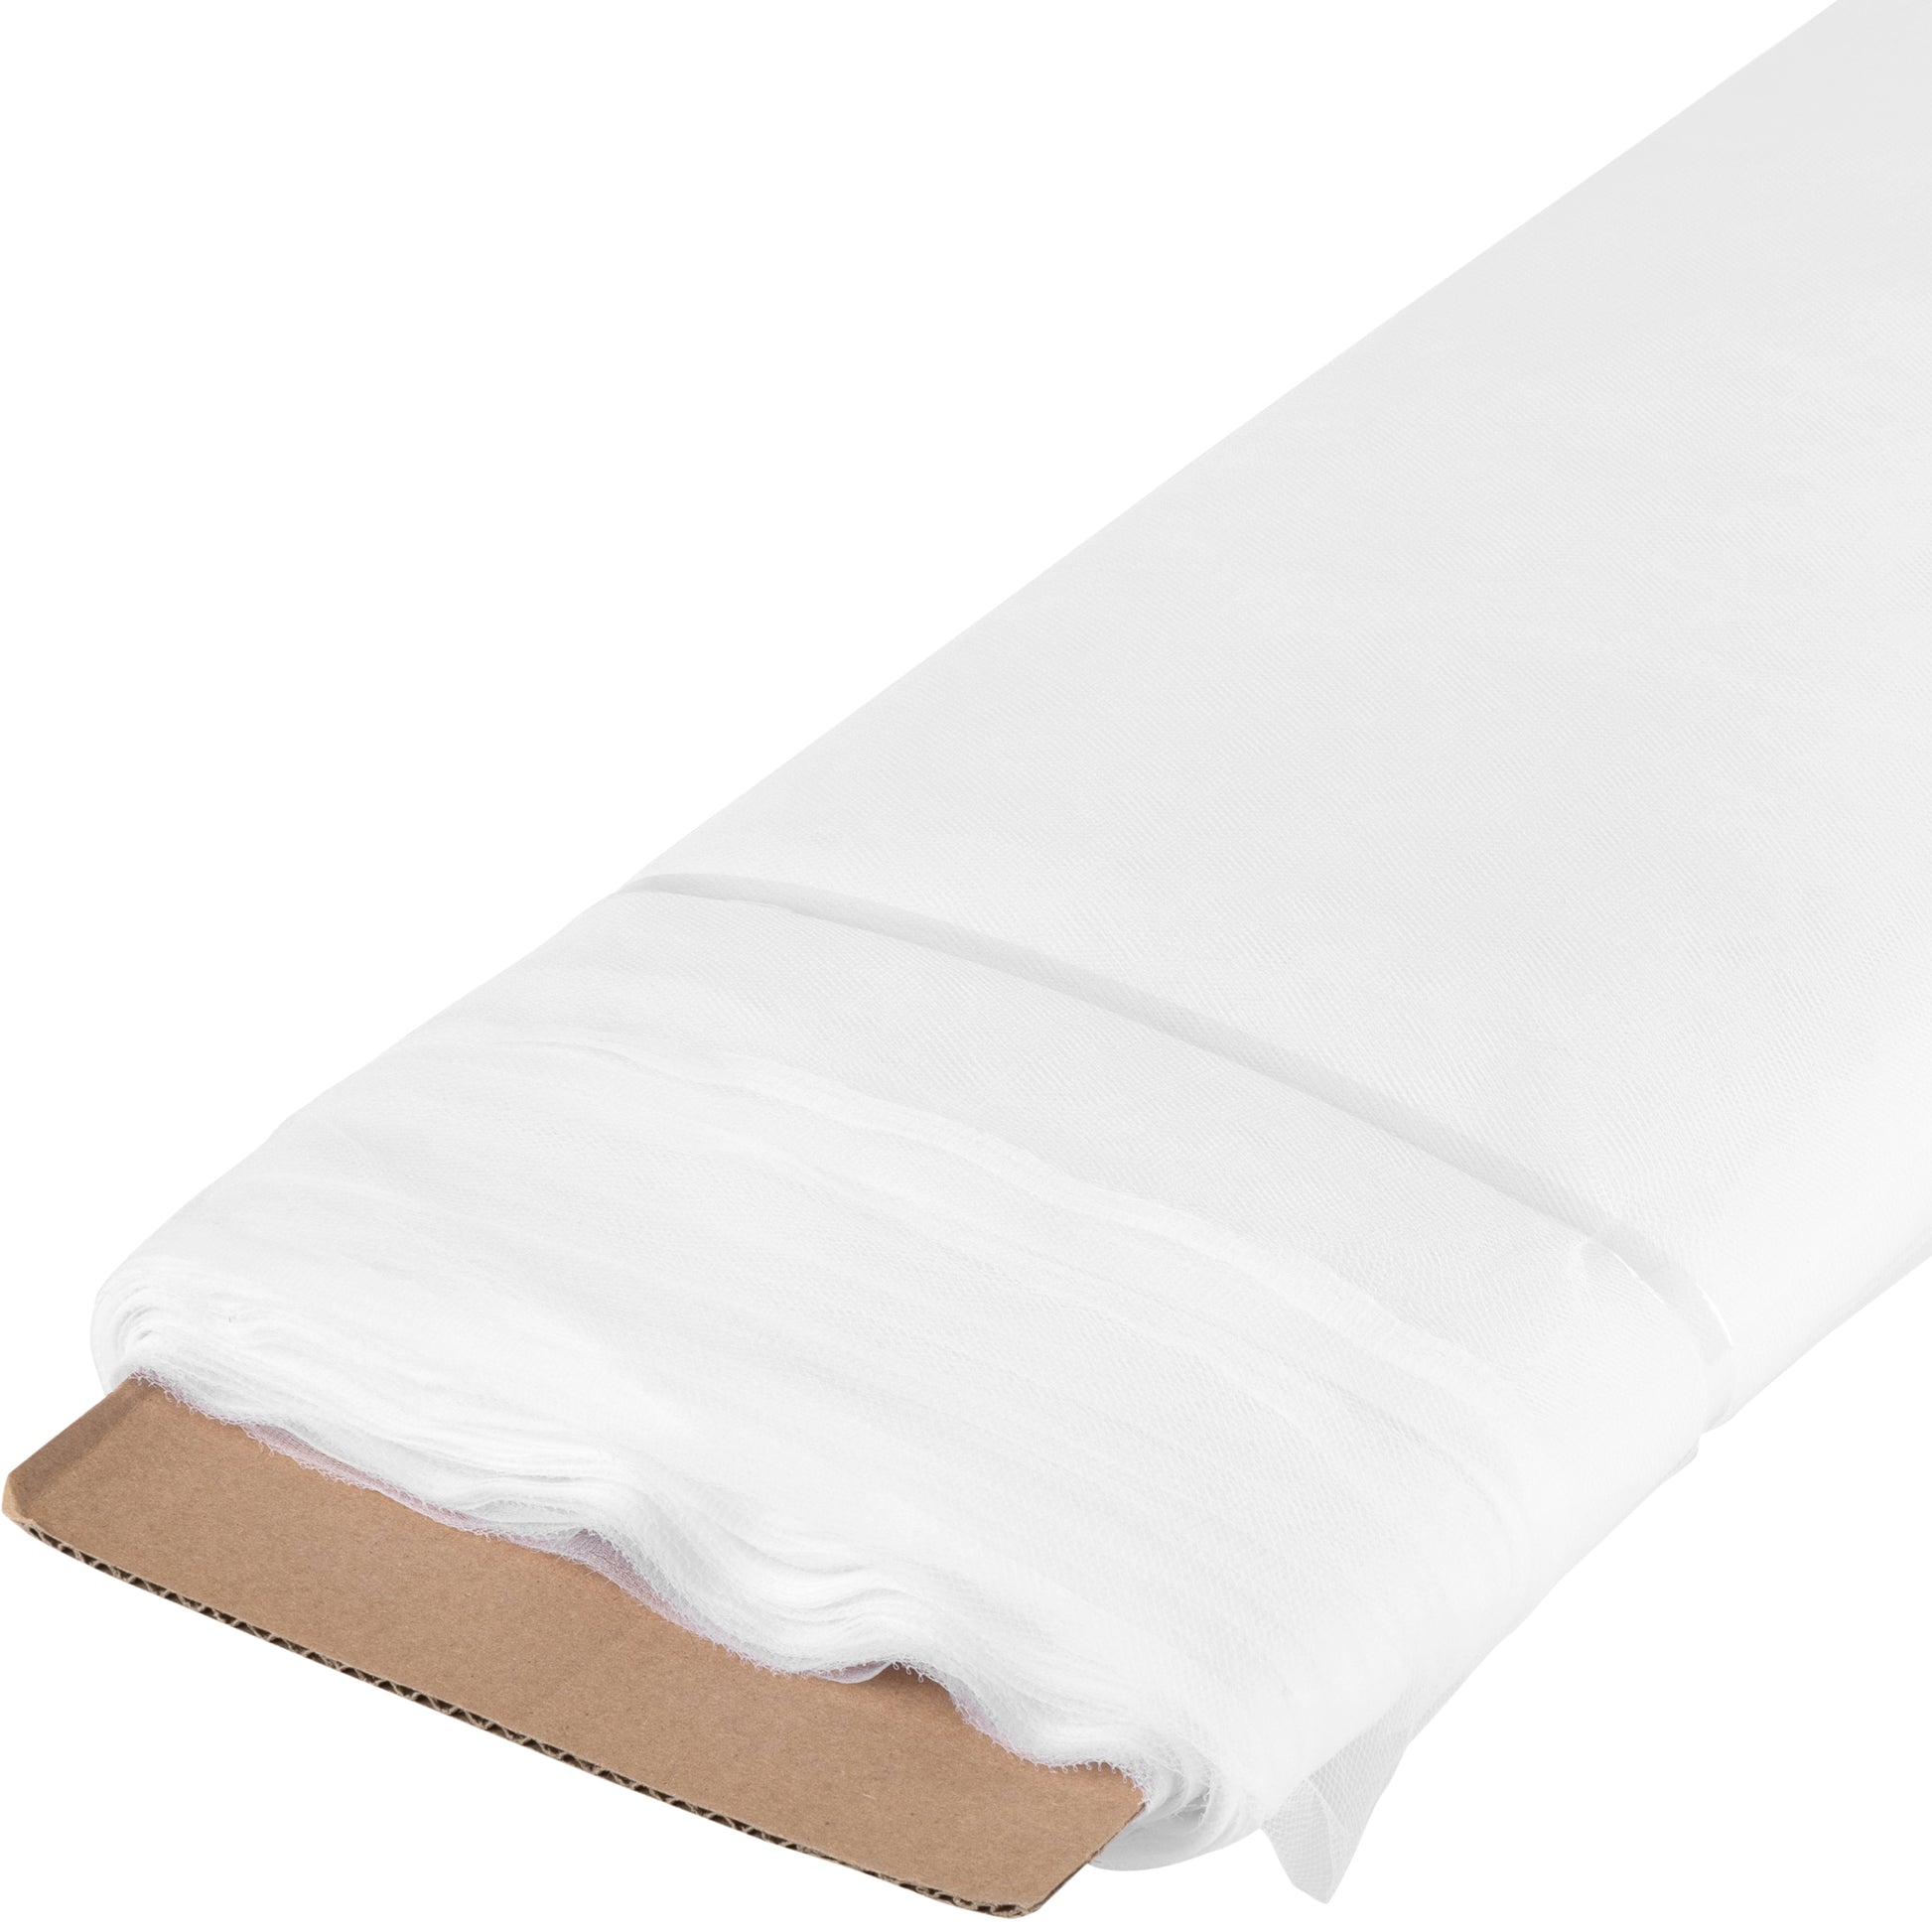 Soft Tulle Fabric Roll 54" x 40 yds - White